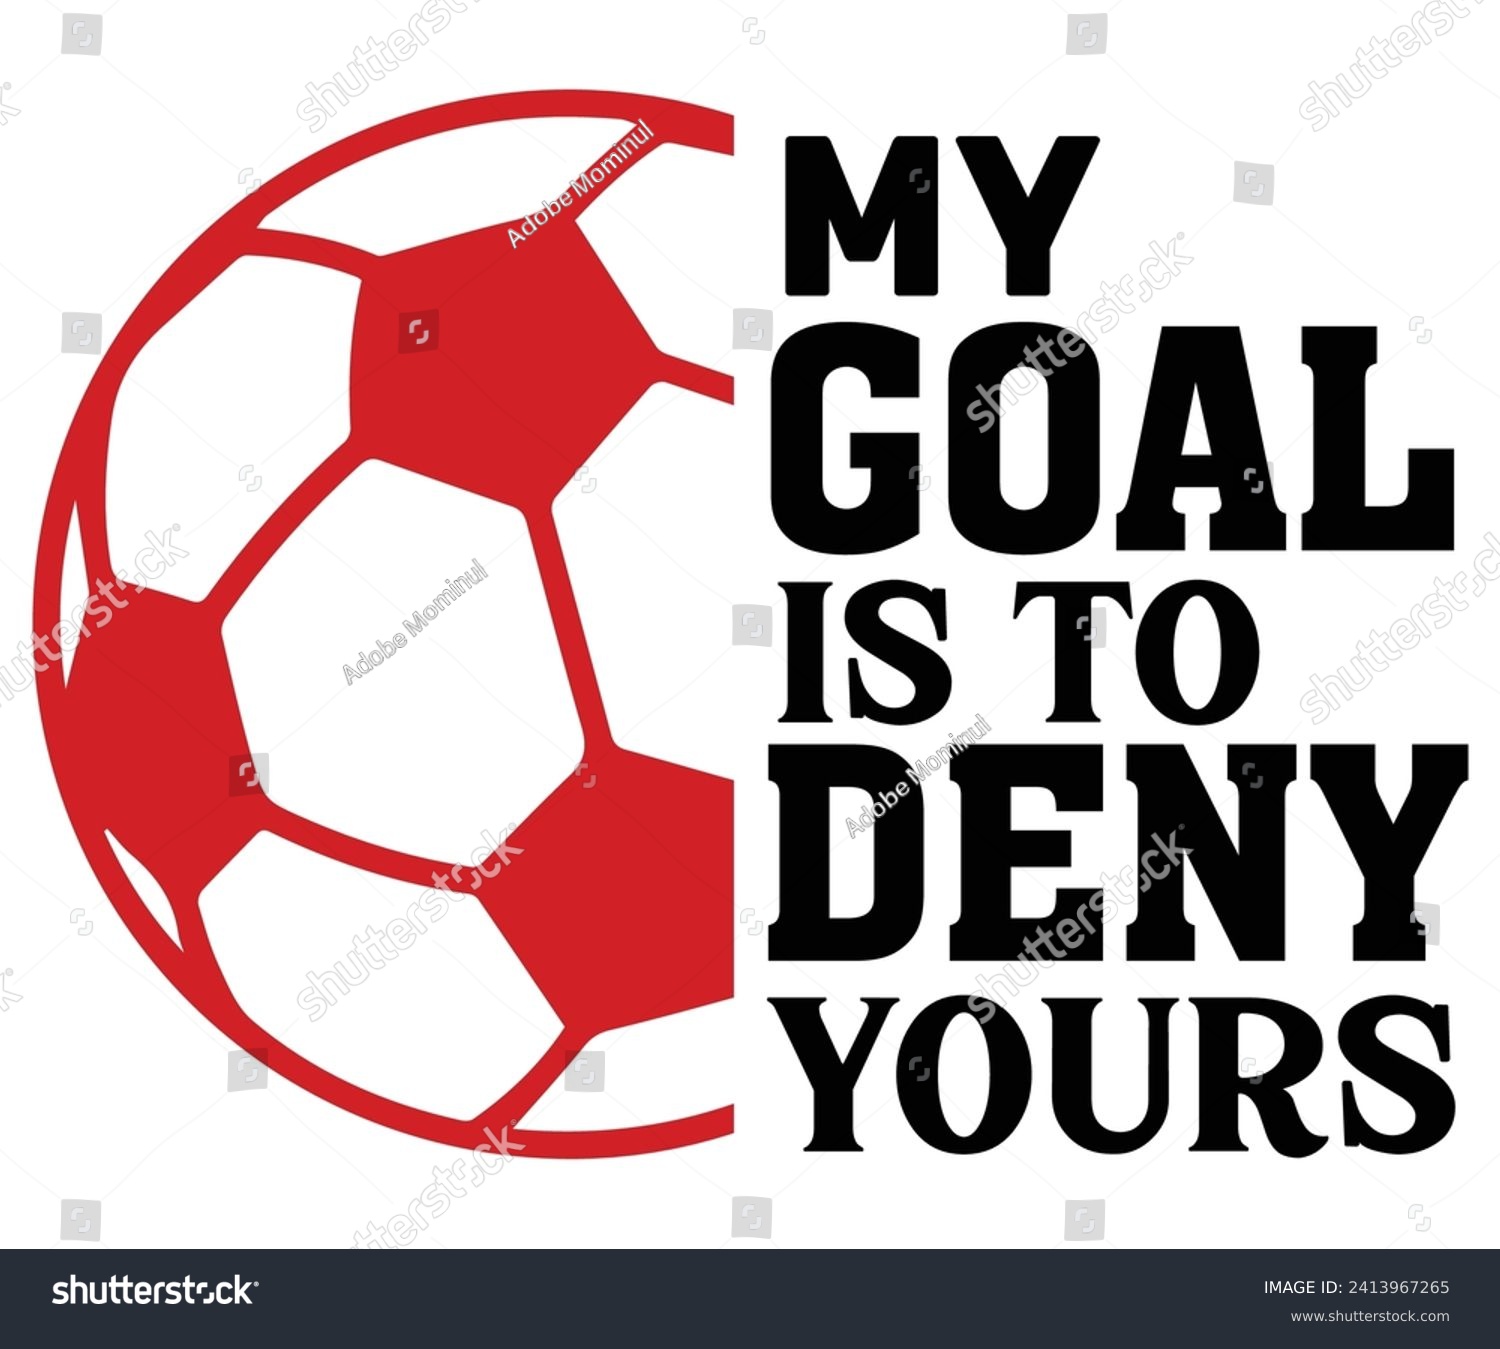 SVG of My Goal Is To Deny yours Svg,Soccer Svg,Soccer Quote Svg,Retro,Soccer Mom Shirt,Funny Shirt,Soccar Player Shirt,Game Day Shirt,Gift For Soccer,Dad of Soccer,Soccer Mascot,Soccer Football,Sport Design svg